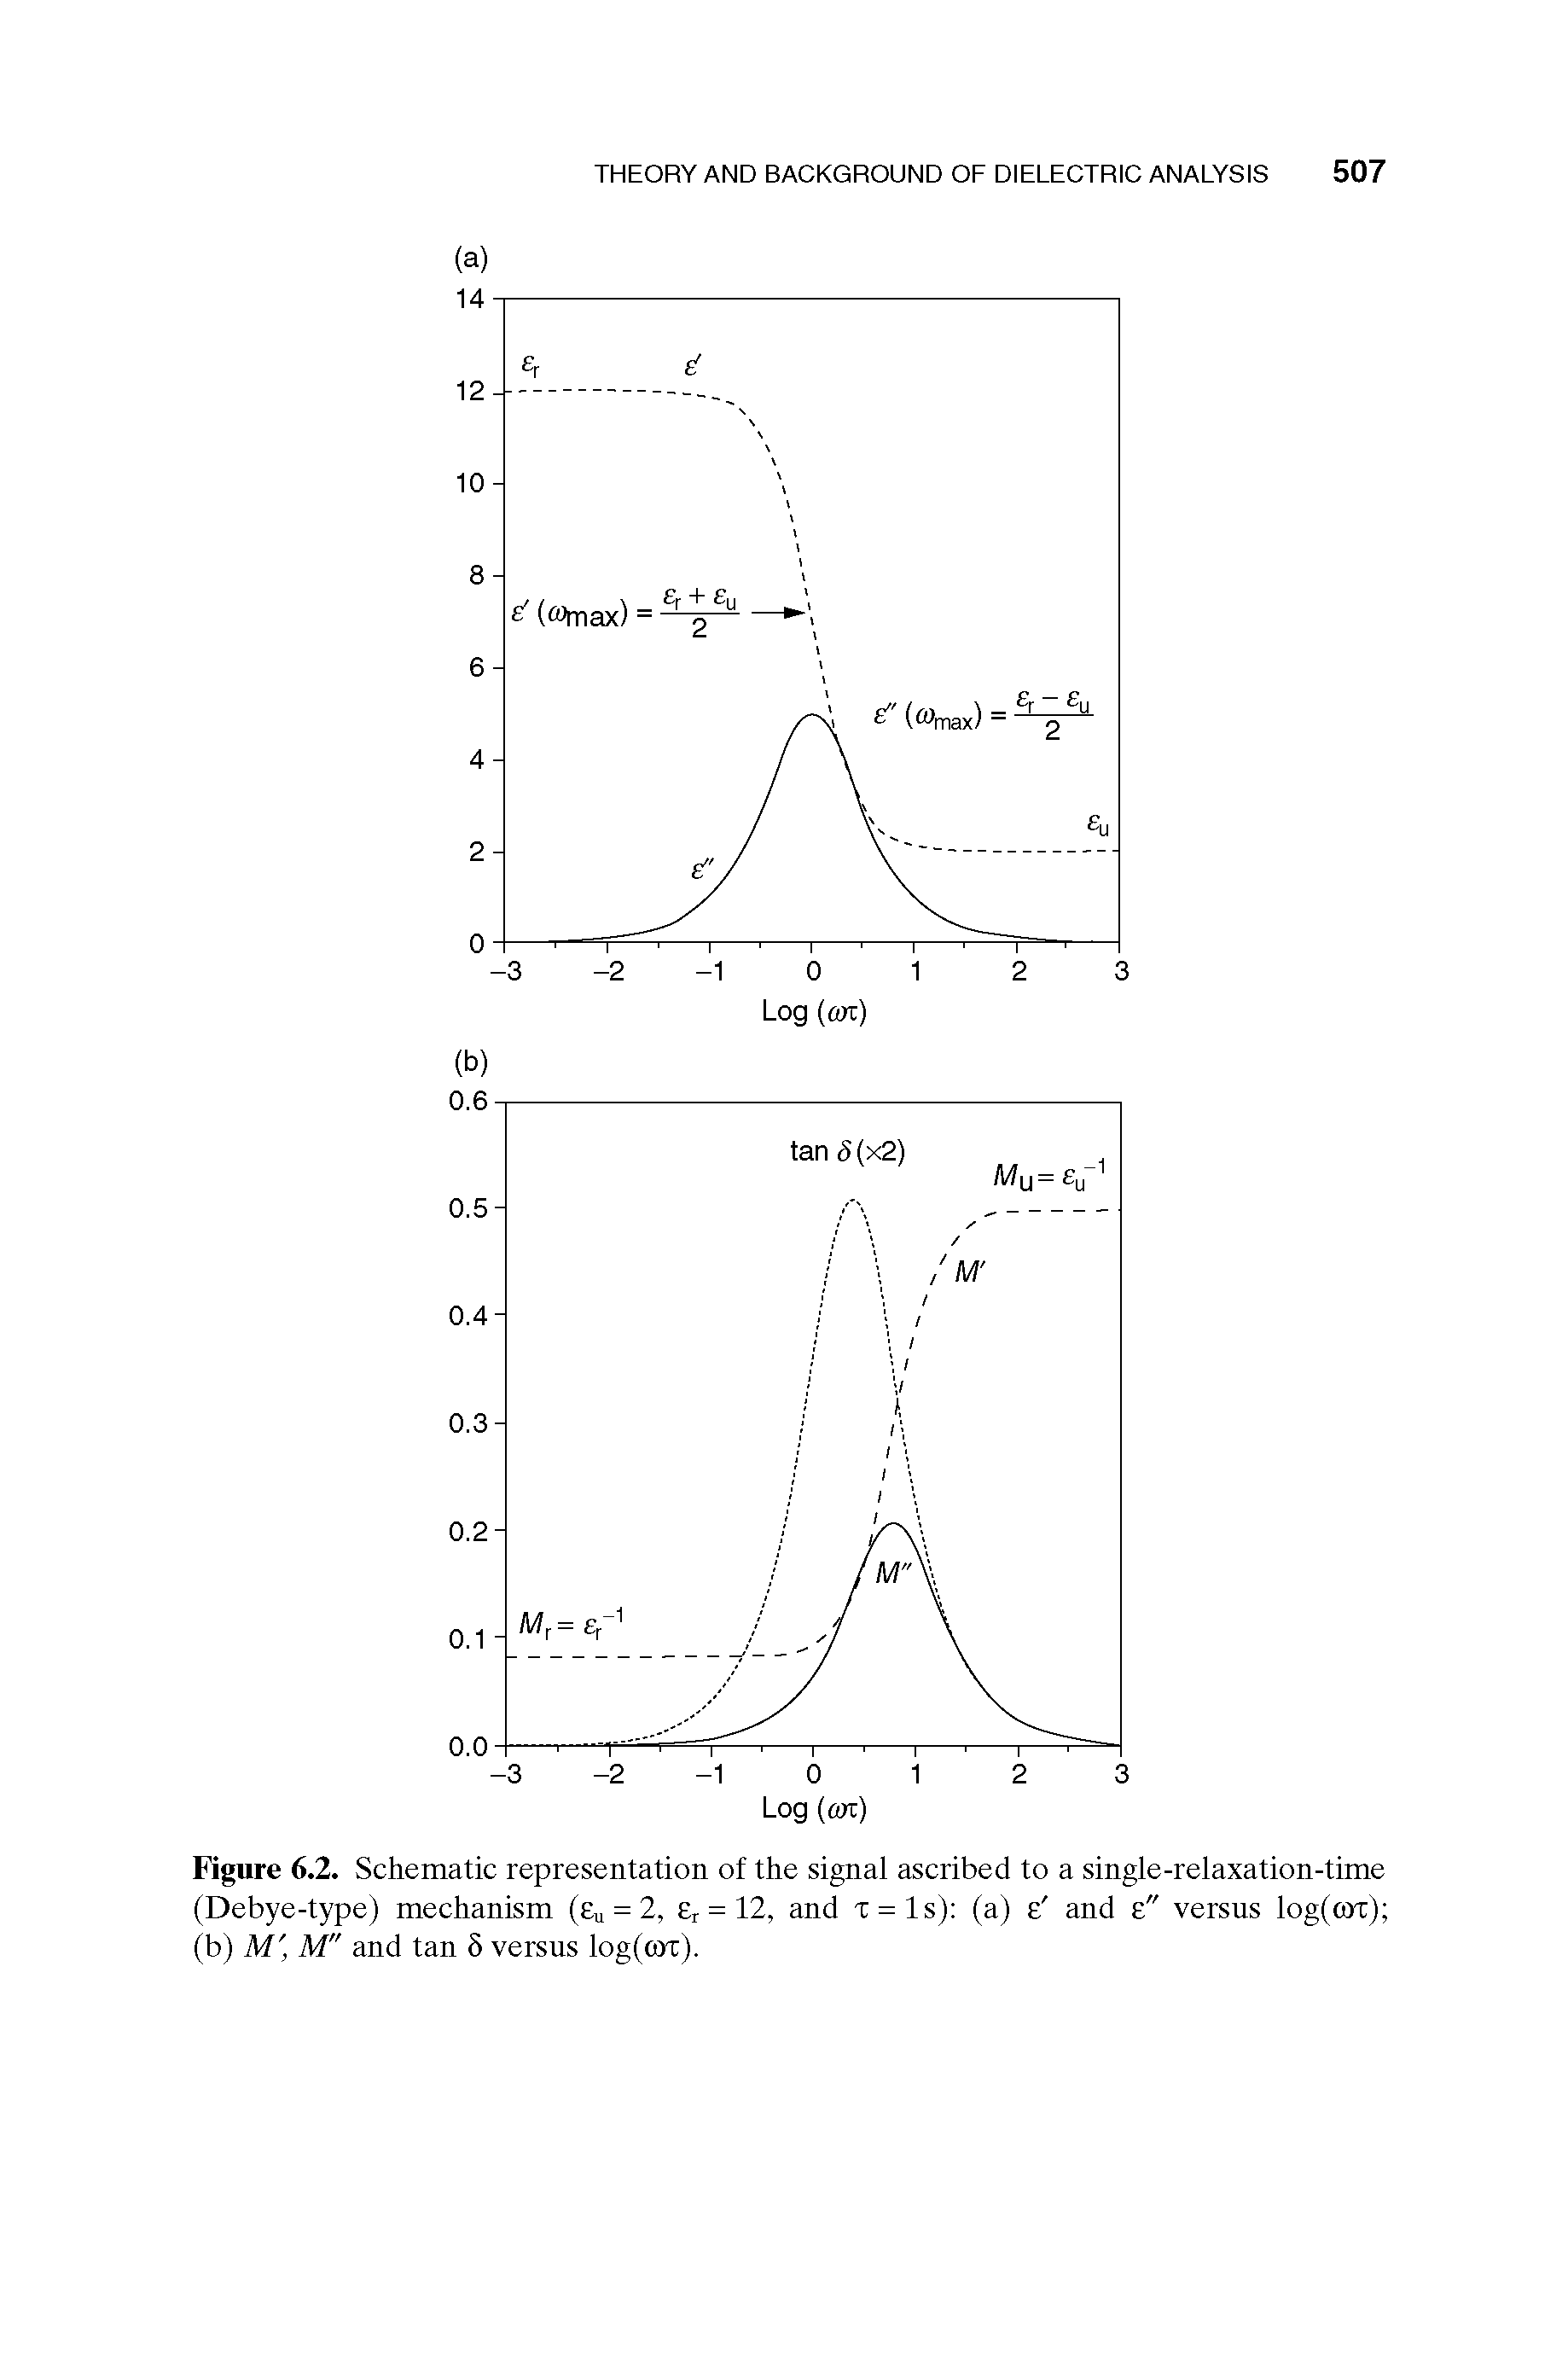 Figure 6.2. Schematic representation of the signal ascribed to a single-relaxation-time (Debye-type) mechanism (Su = 2, e, = 12, and x = ls) (a) e and e" versus log(cor) (b) M, M" and tan 5 versus log(cor).